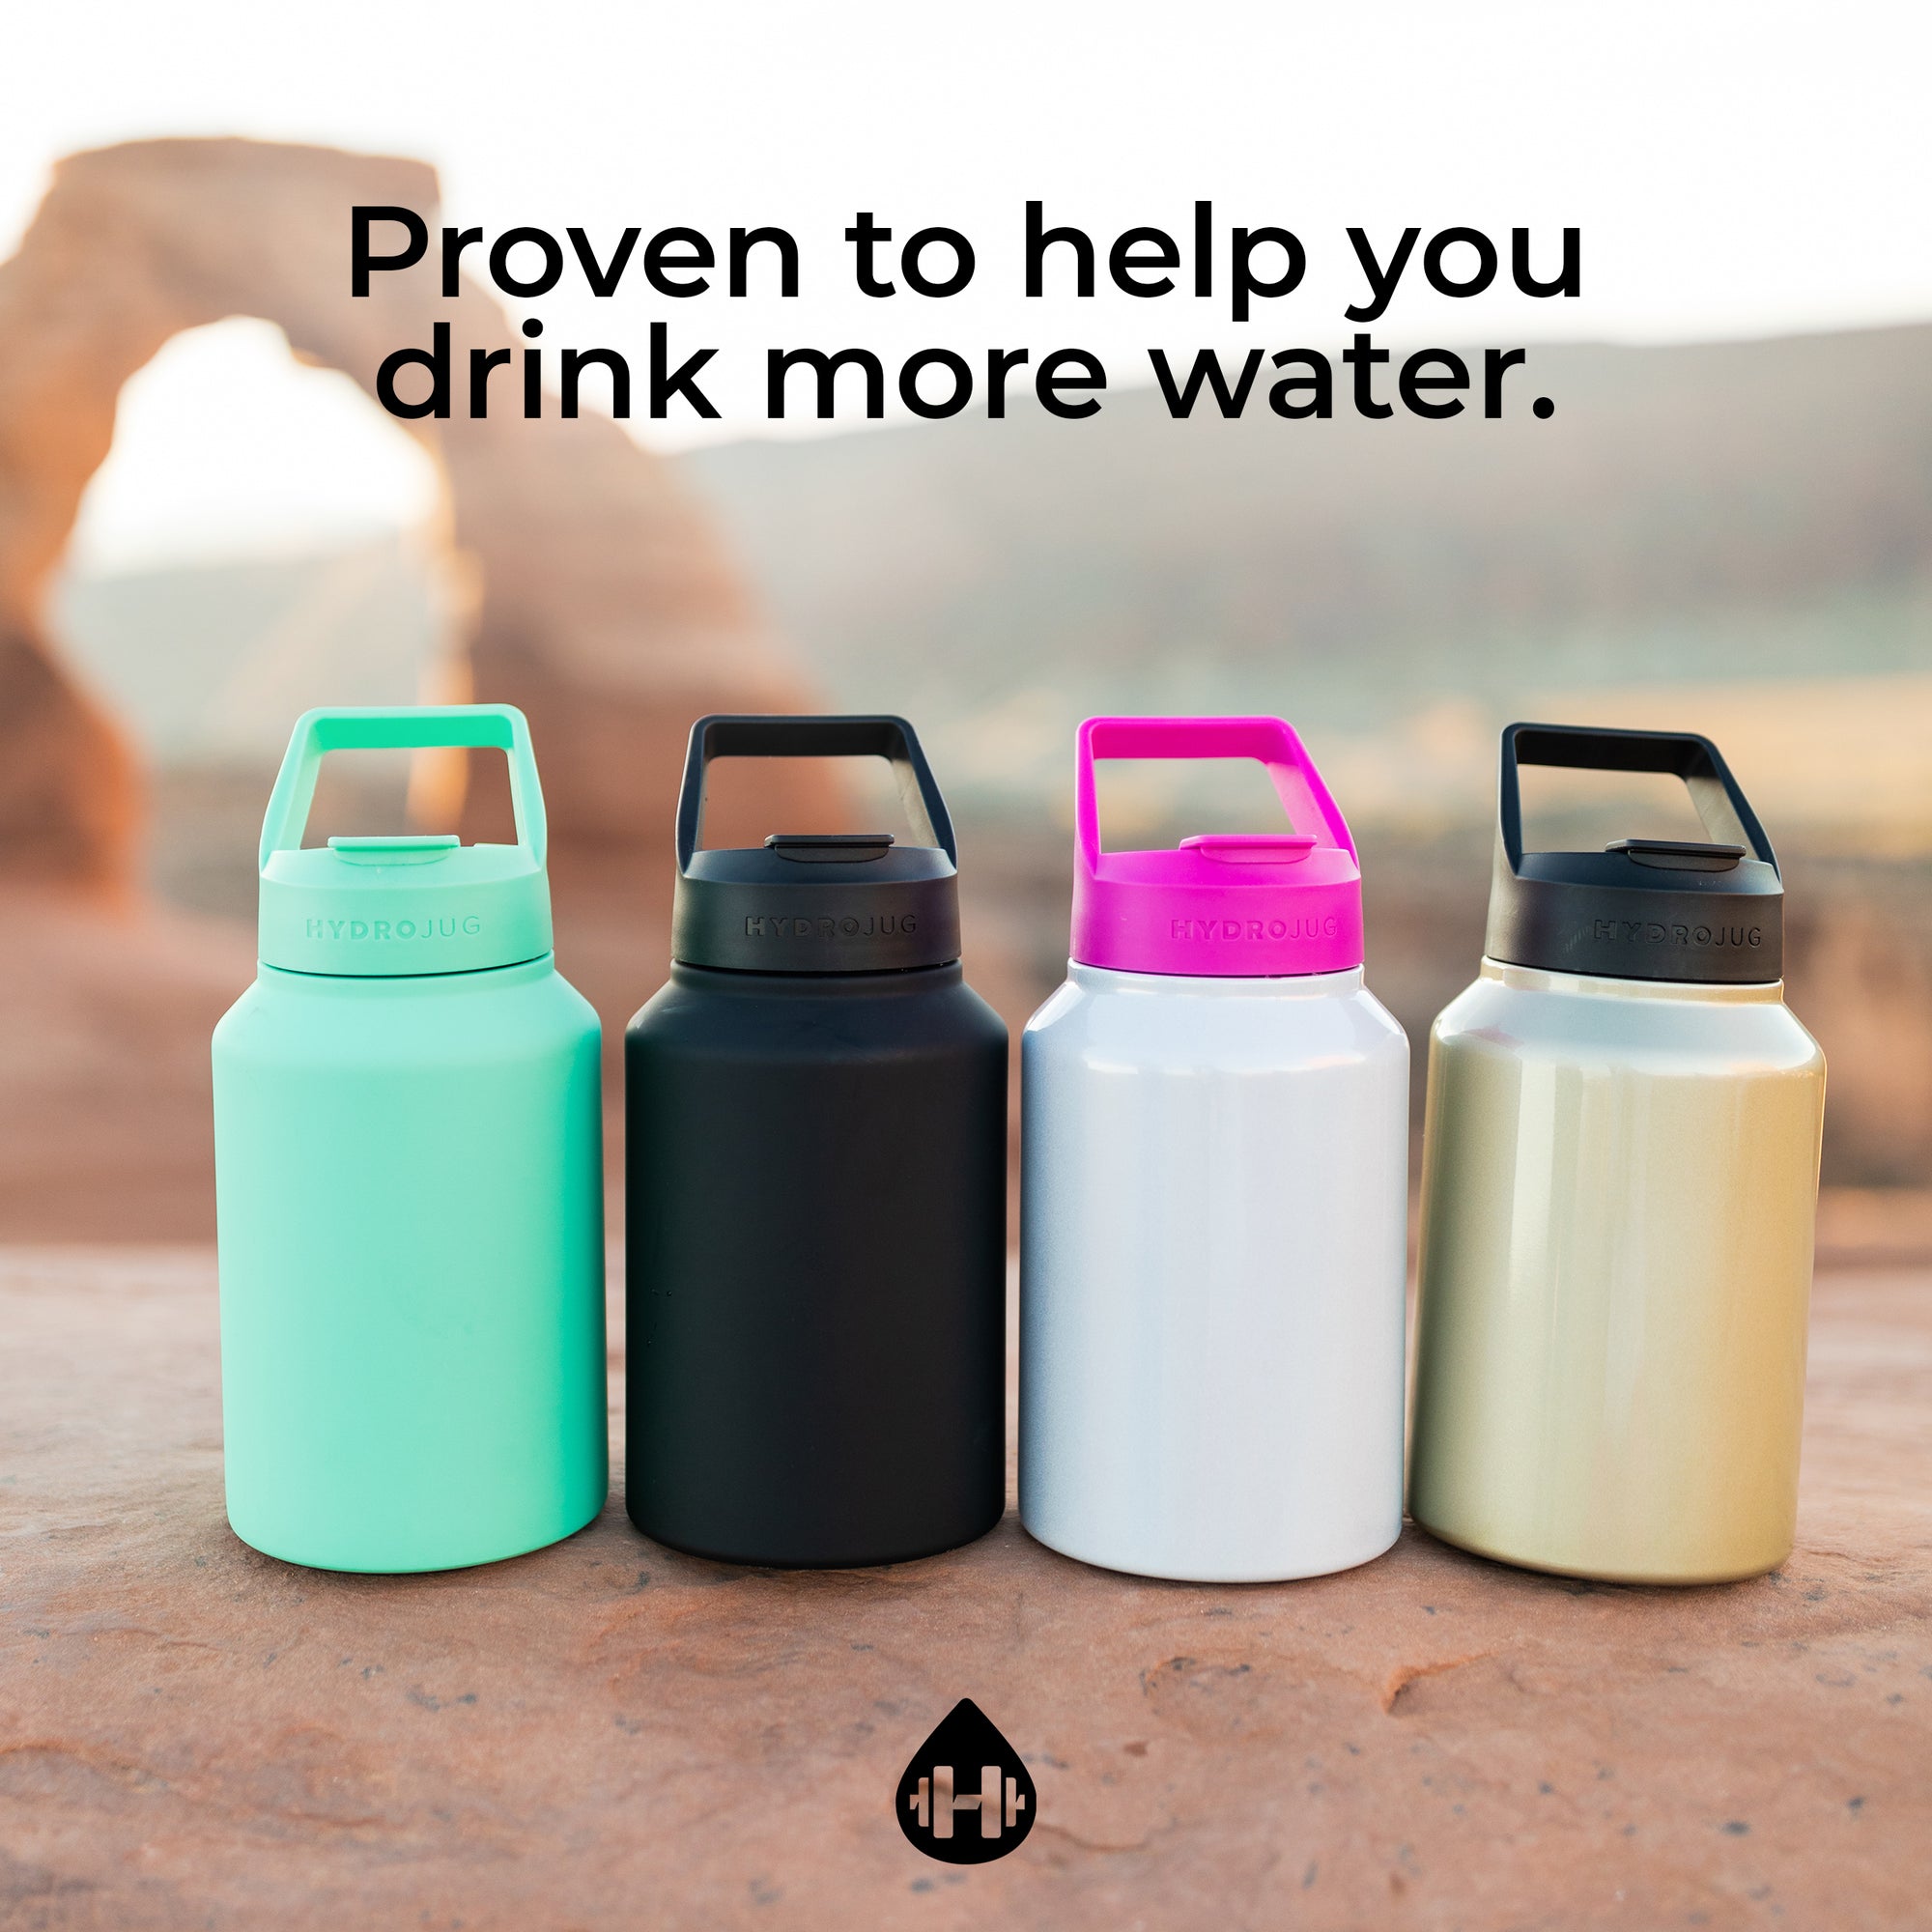 Your Guide to Choosing the Best Big Water Bottles